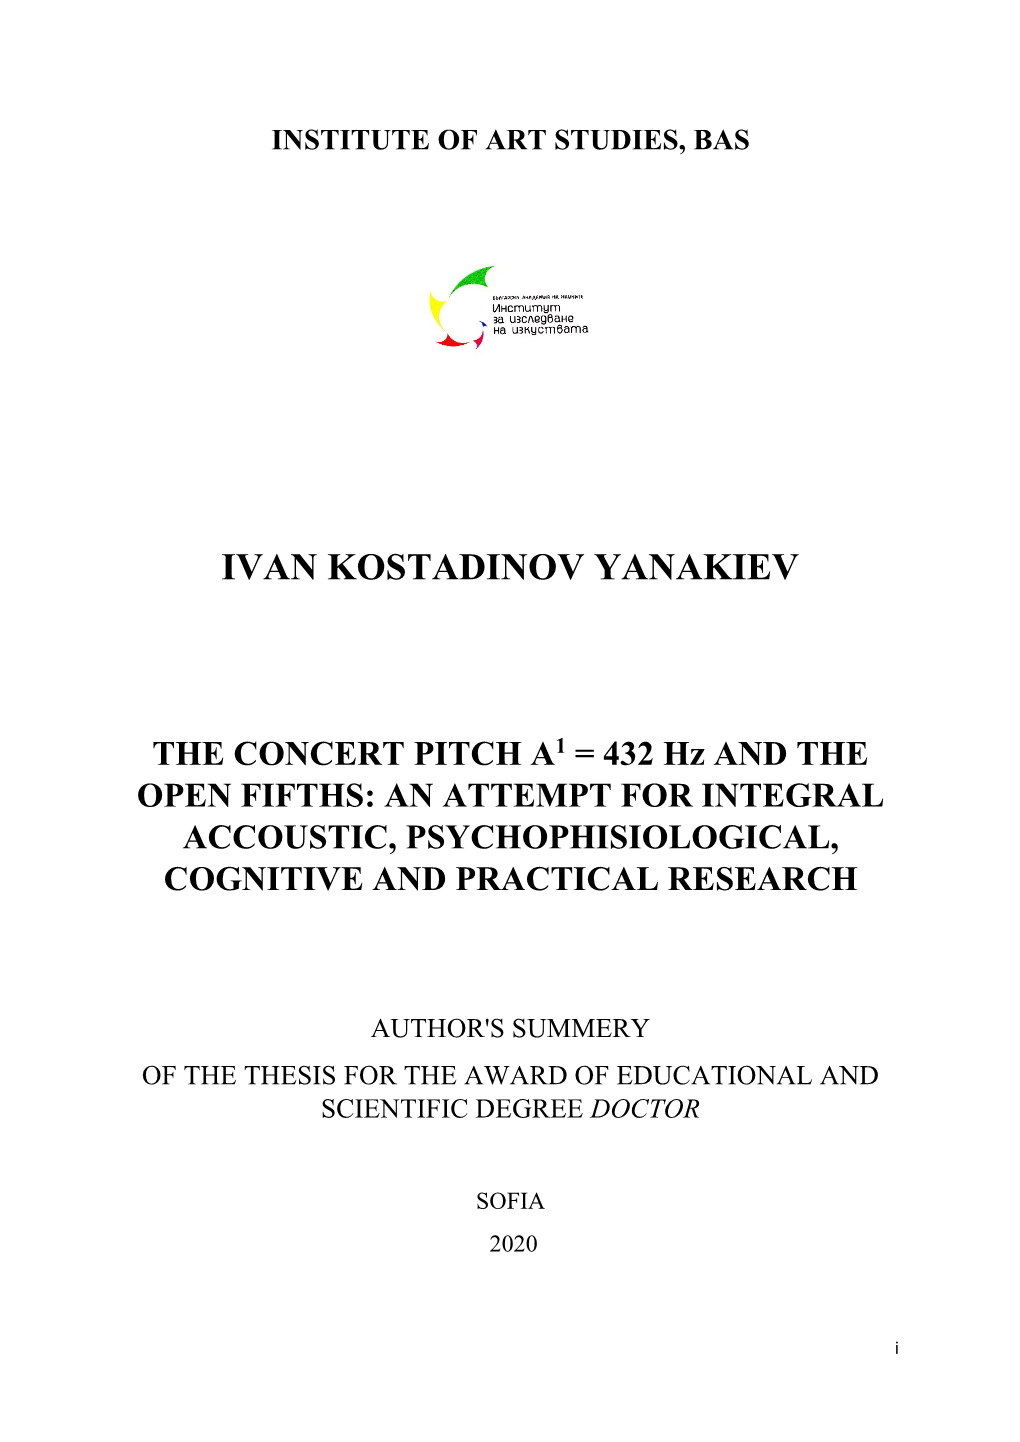 INSTITUTE of ART STUDIES, BAS IVAN KOSTADINOV YANAKIEV the CONCERT PITCH A1 = 432 Hz and the OPEN FIFTHS